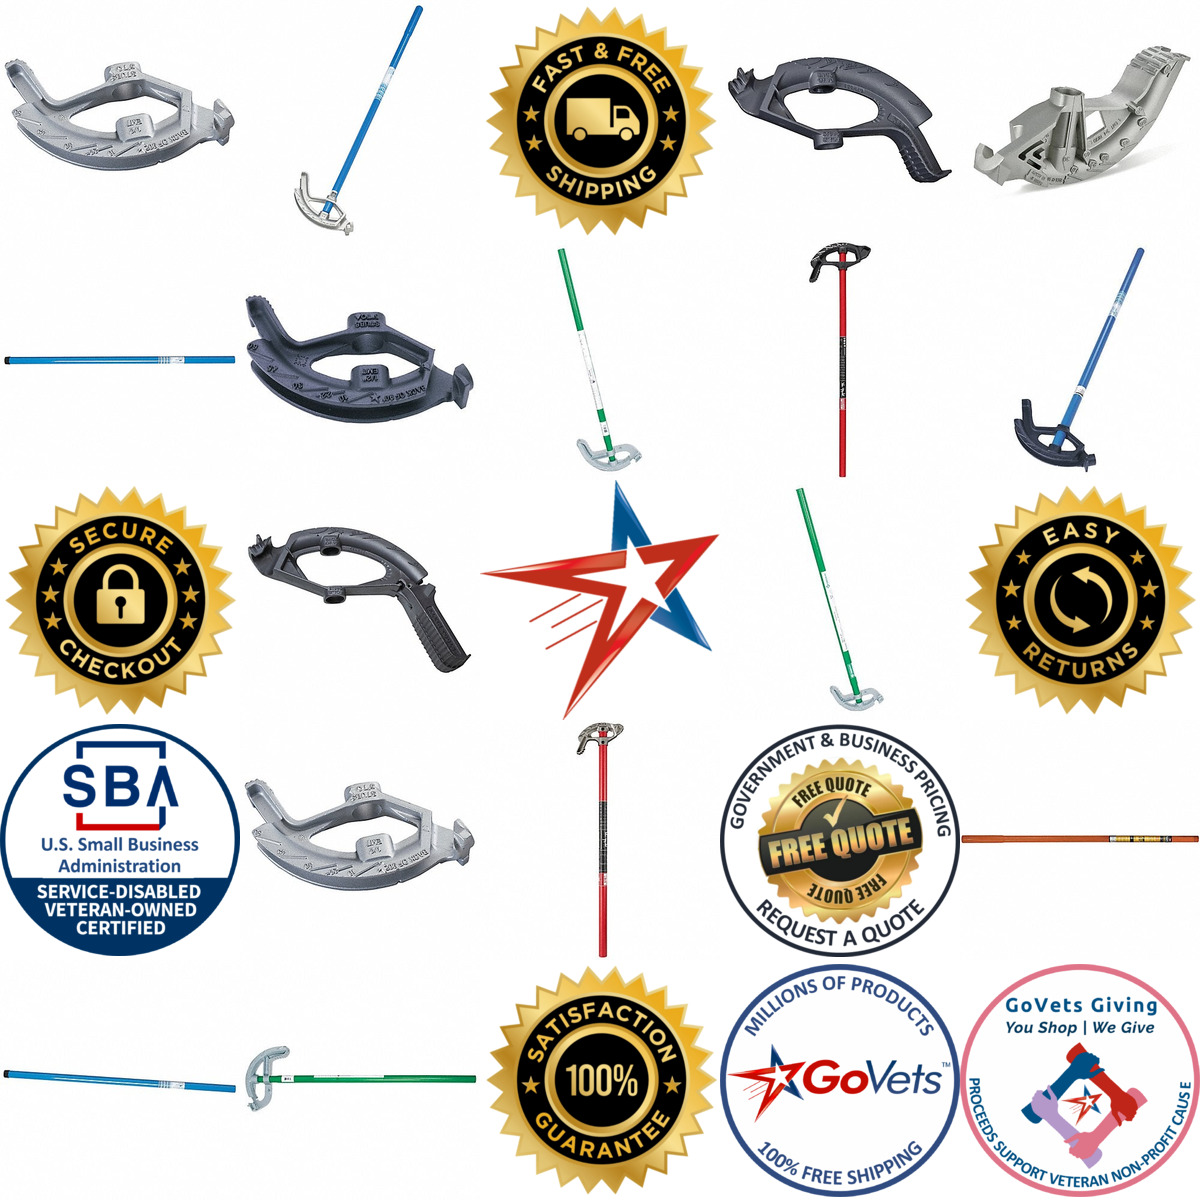 A selection of Hand Conduit Benders and Handles products on GoVets